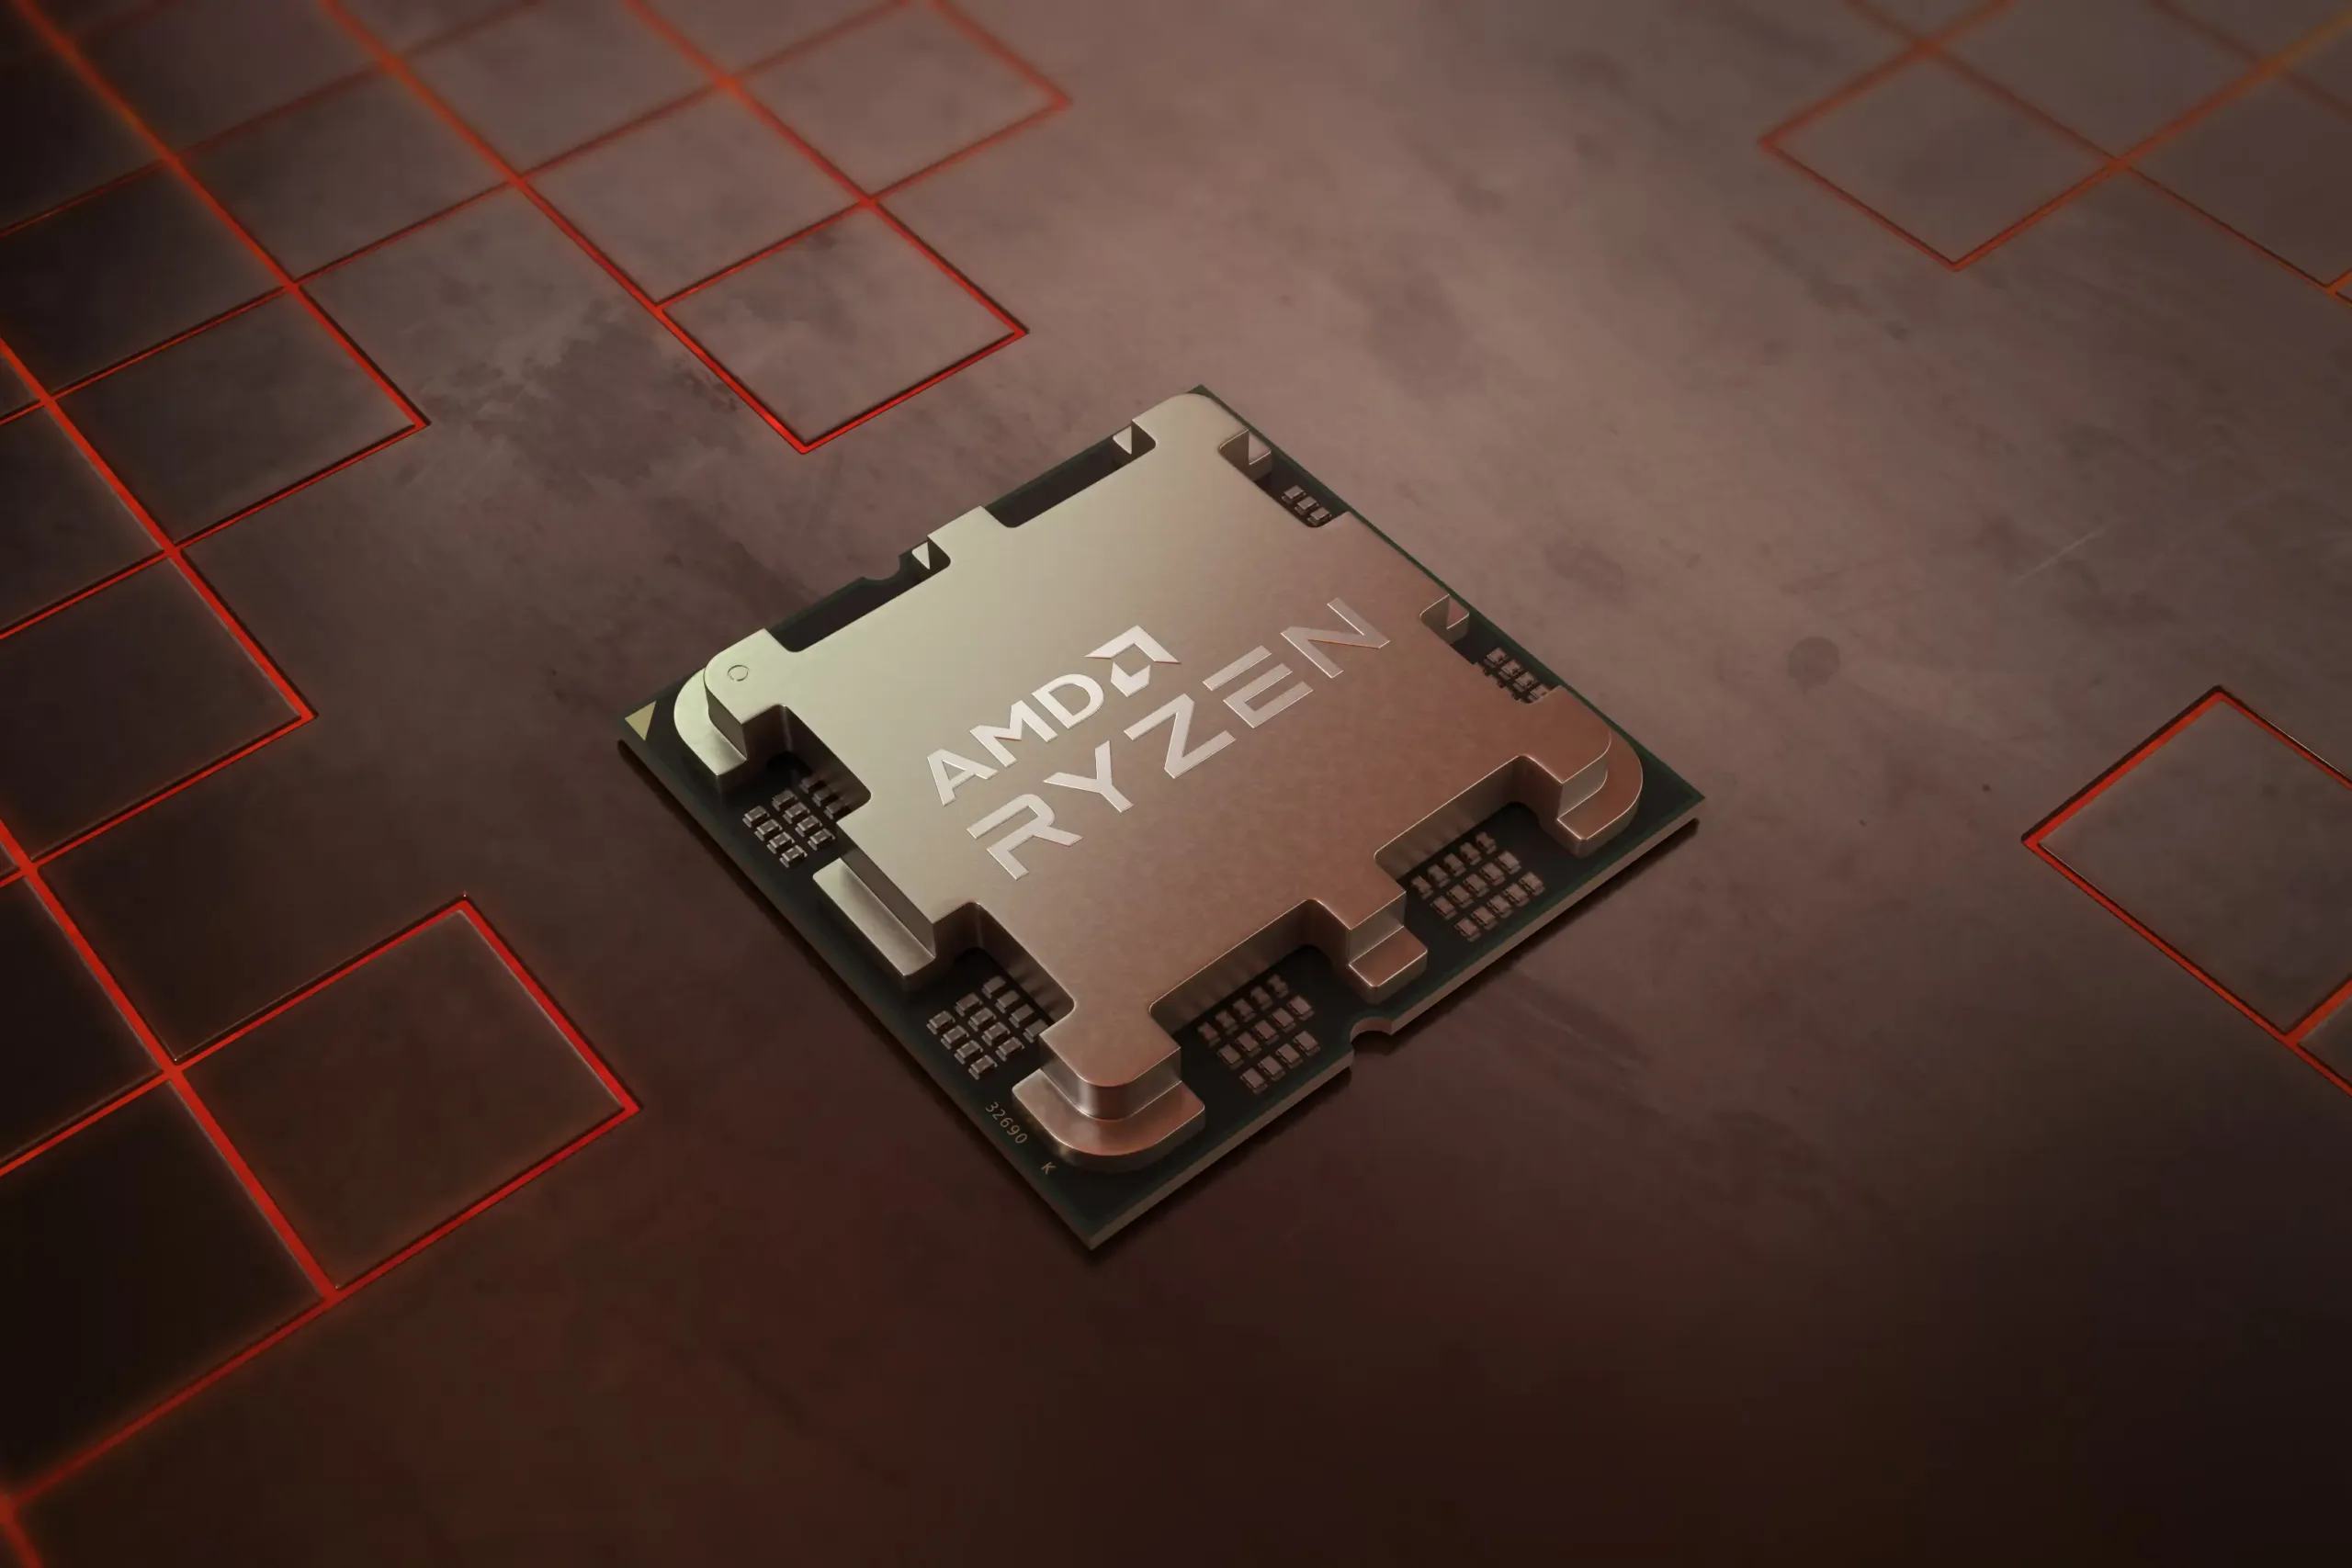 Zen 5 Based Desktop Processor and “Strix Point” and “Fire Range” Mobile Processors Leaked in Shipping Manifest